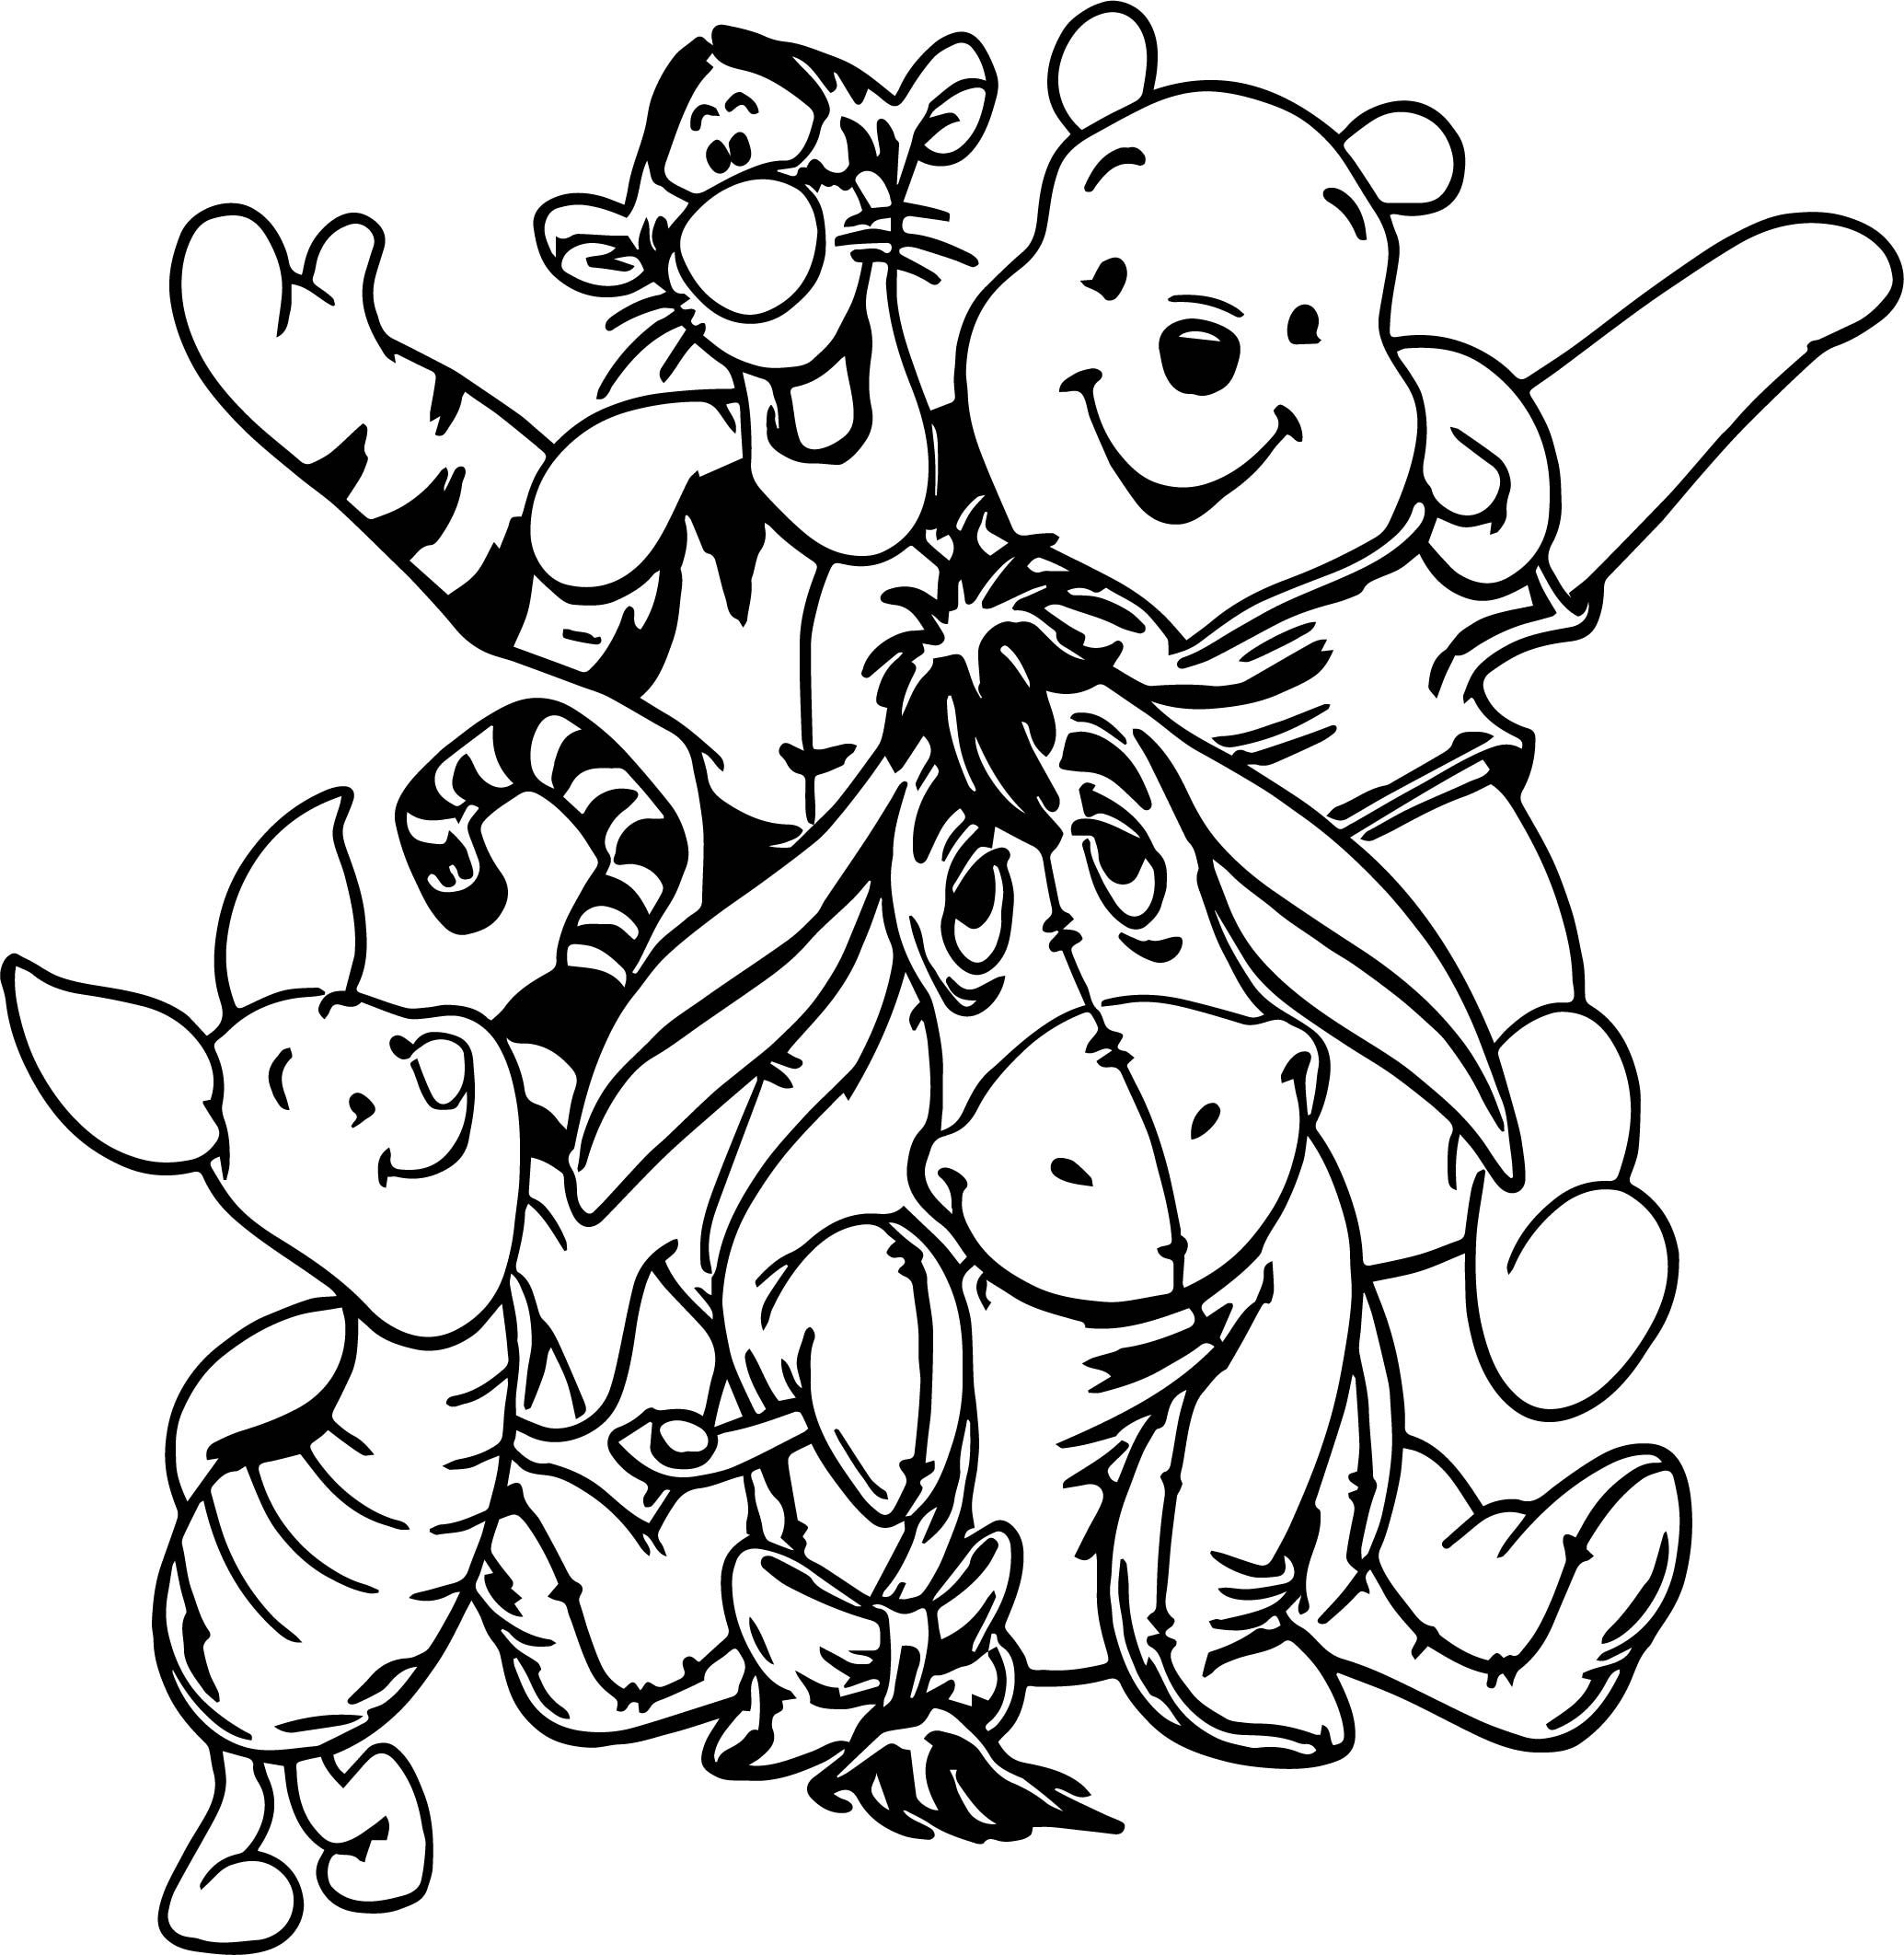 Cool winnie the pooh all friends coloring page owl coloring pages love coloring pages disney coloring pages